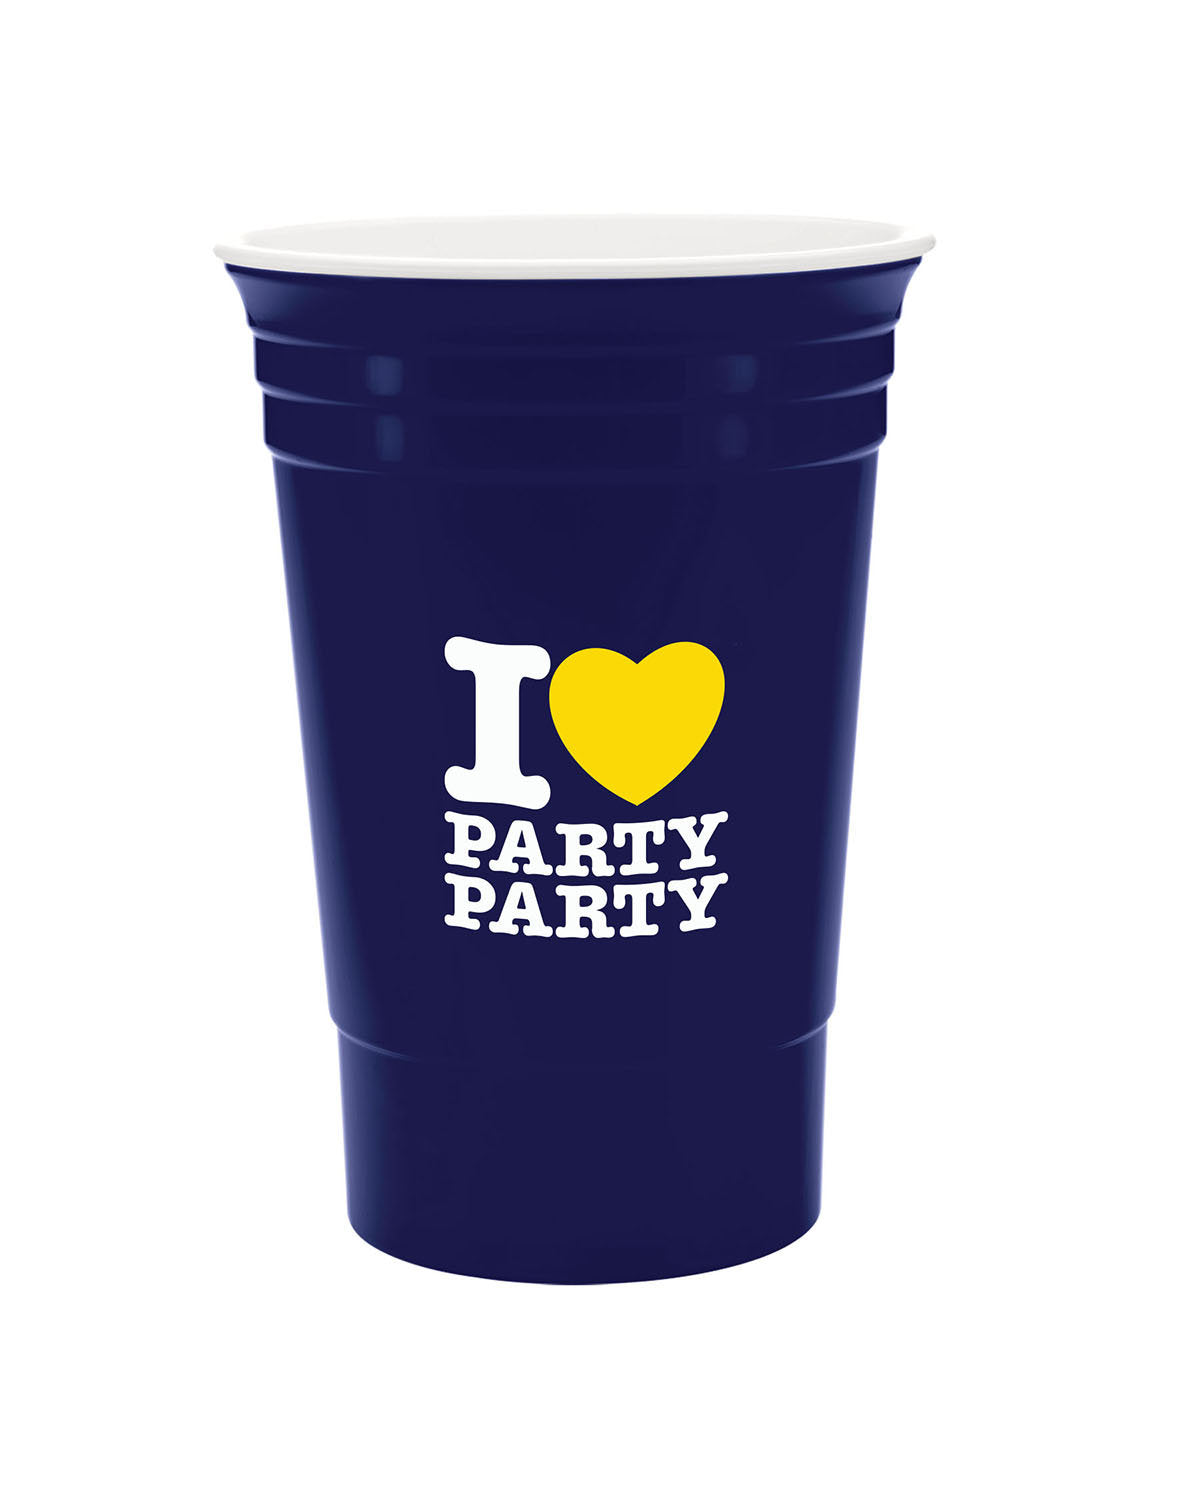 Drinking cups and Koozies